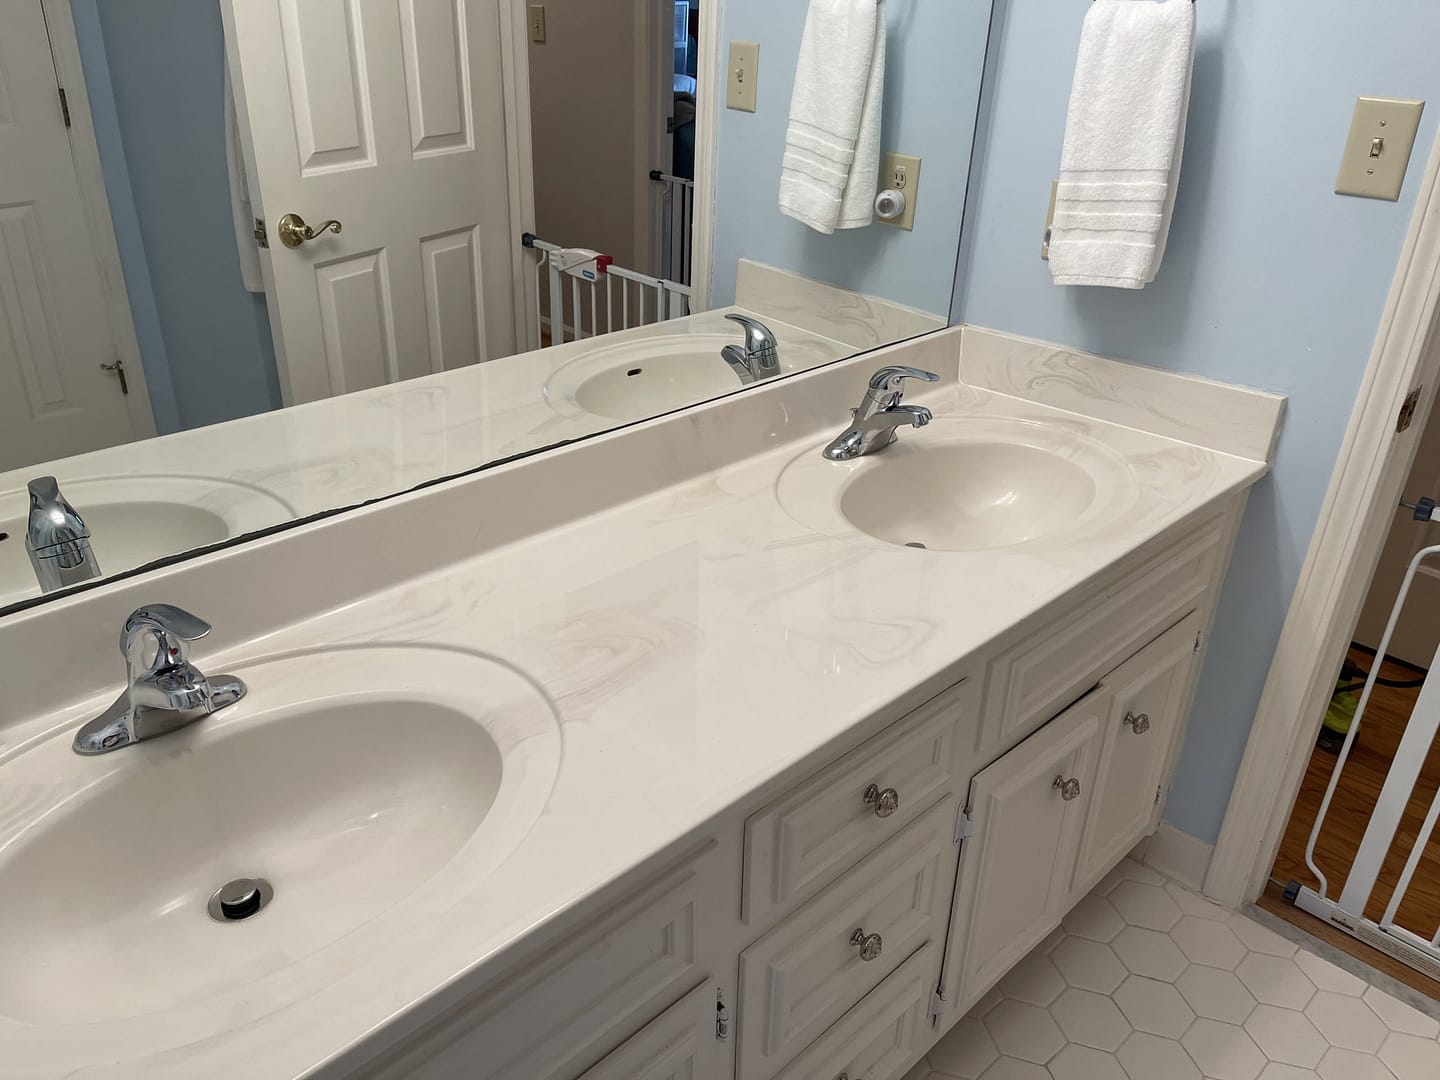 Dual Bathroom Sink With Both Faucets Replaced